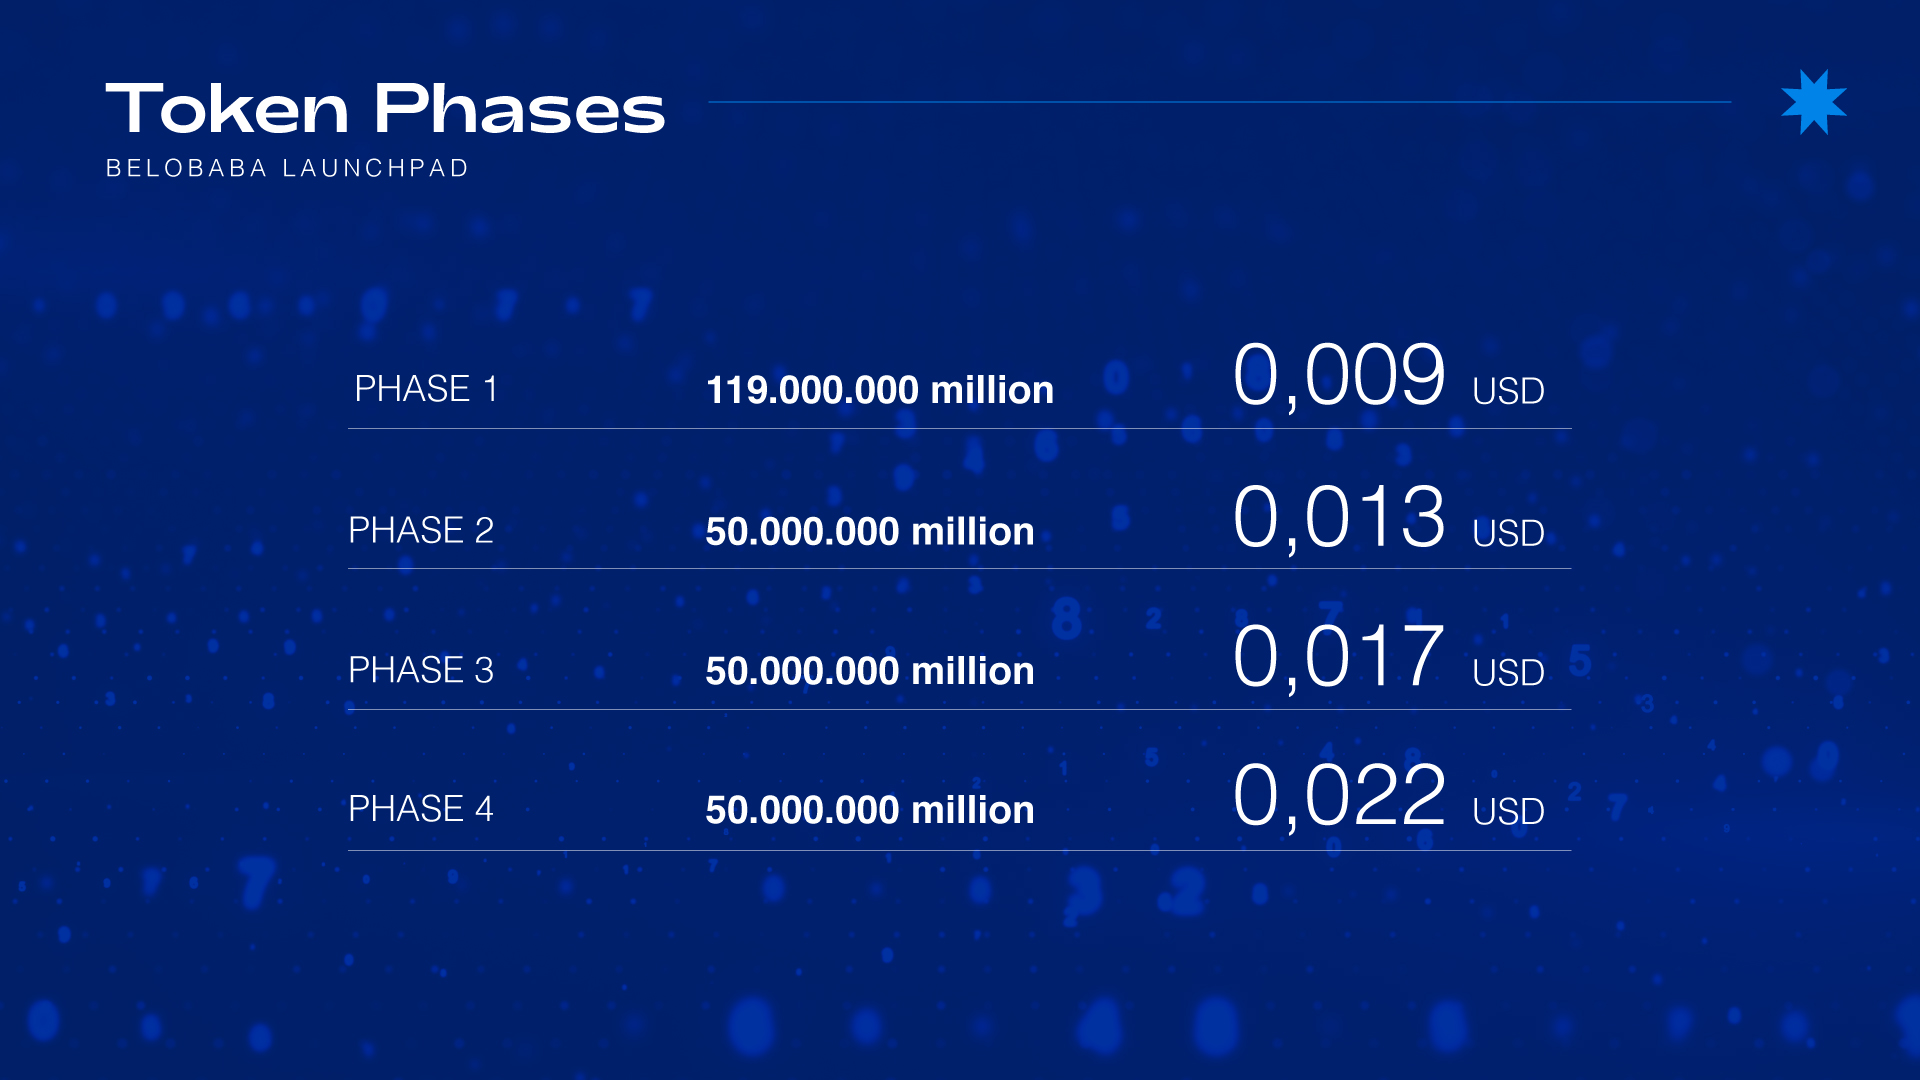 Belobaba Launchpad Token Phases